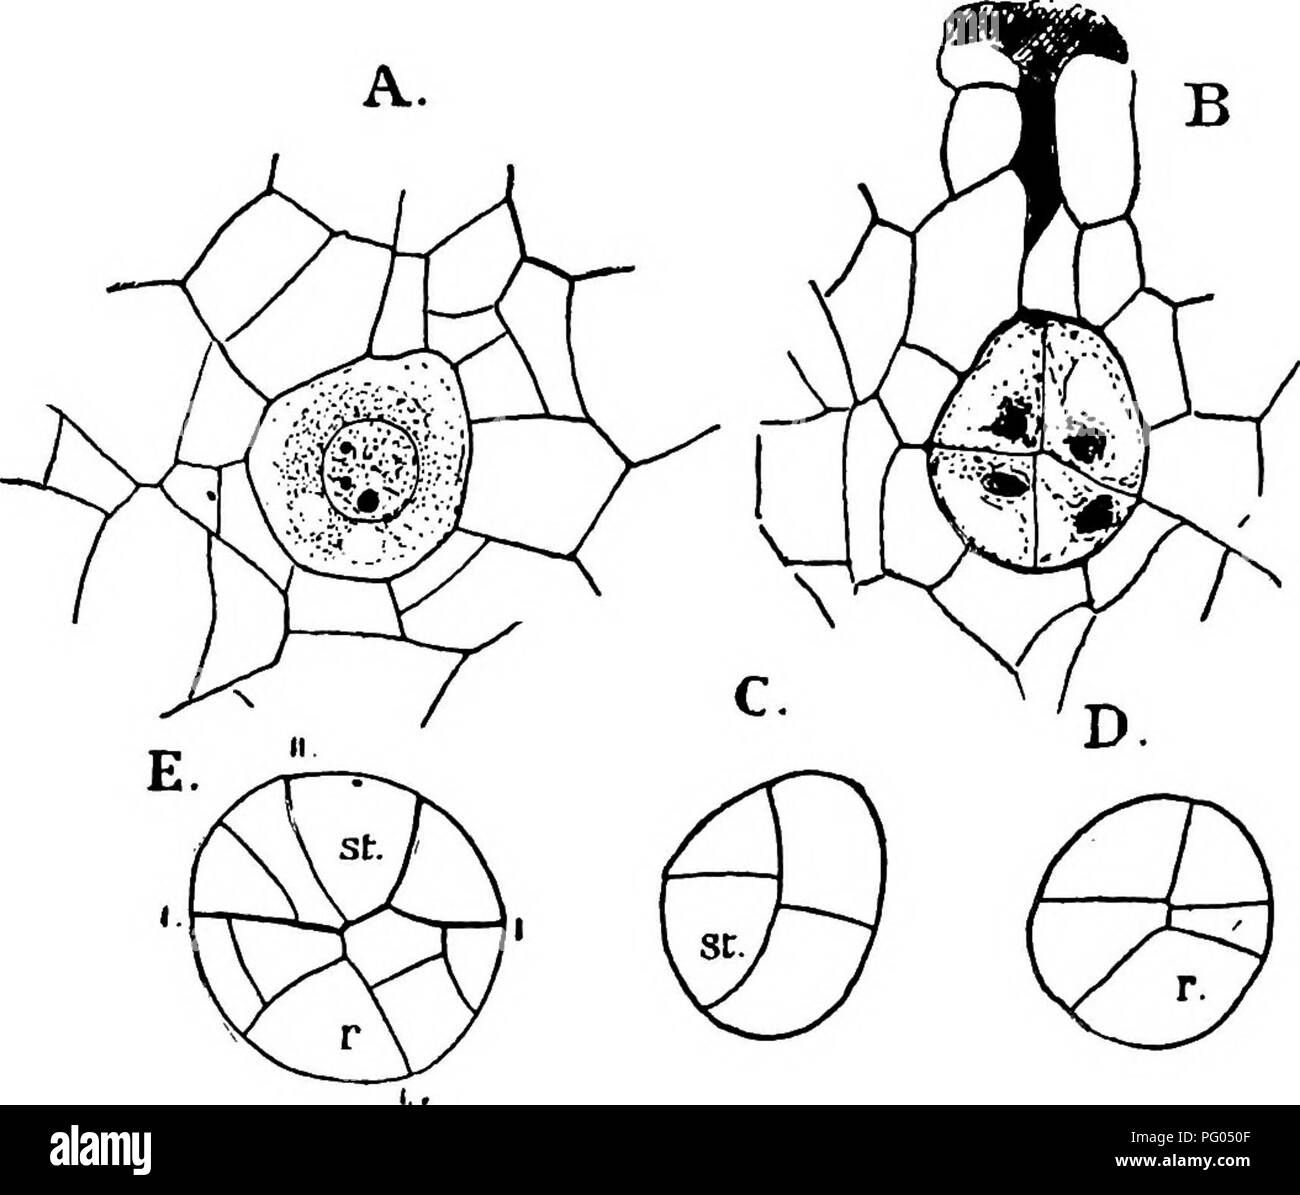 . The structure and development of mosses and ferns (Archegoniatae). Plant morphology; Mosses; Ferns. 454 MOSSES AND FERNS CHAP. the nucleus is decidedly larger than before fertilisation. The lower neck cells approach and apparently become grown to- gether, and as the divisions in the lower neck cells here contrib- ute to the calyptra, the young embryo becomes more deeply sunken in the prothallial tissue than is common in the Ferns. The basal wall is transverse, as in the Marattiacese, and the formation of the quadrants takes place as usual. The position of the quadrant walls is, however, some Stock Photo